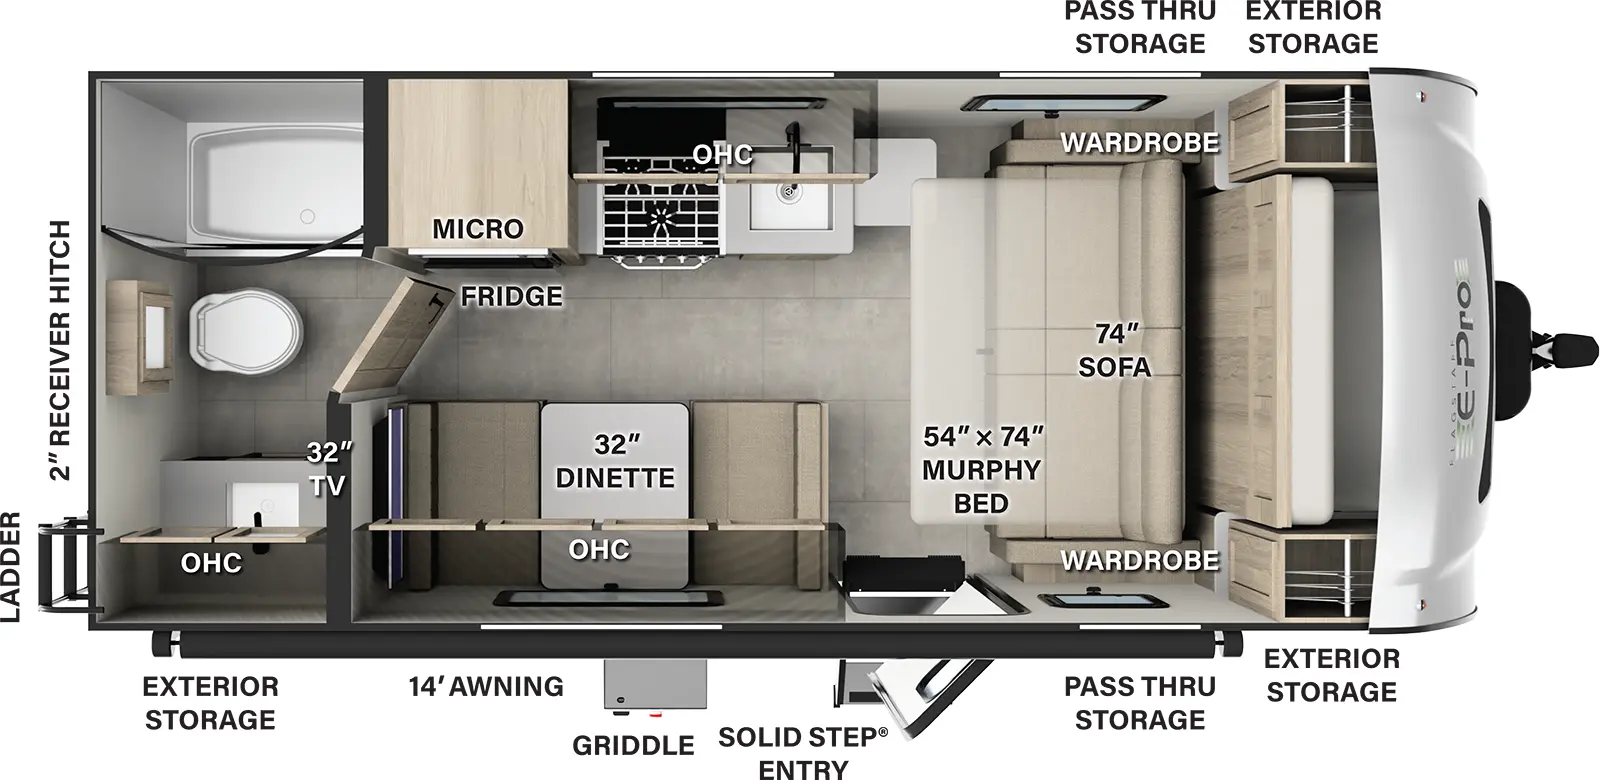 The E19FD has zero slideouts and one entry. Exterior features storage, pass-thru storage, solid step entry, griddle, 14 foot awning, rear ladder, and 2 inch receiver hitch. Interior layout front to back: murphy bed sofa with wardrobes on each side; off-door side kitchen counter with sink, cooktop, overhead cabinet, microwave, and refrigerator; door side entry, dinette, overhead cabinet, and TV; rear full bathroom with overhead cabinet.